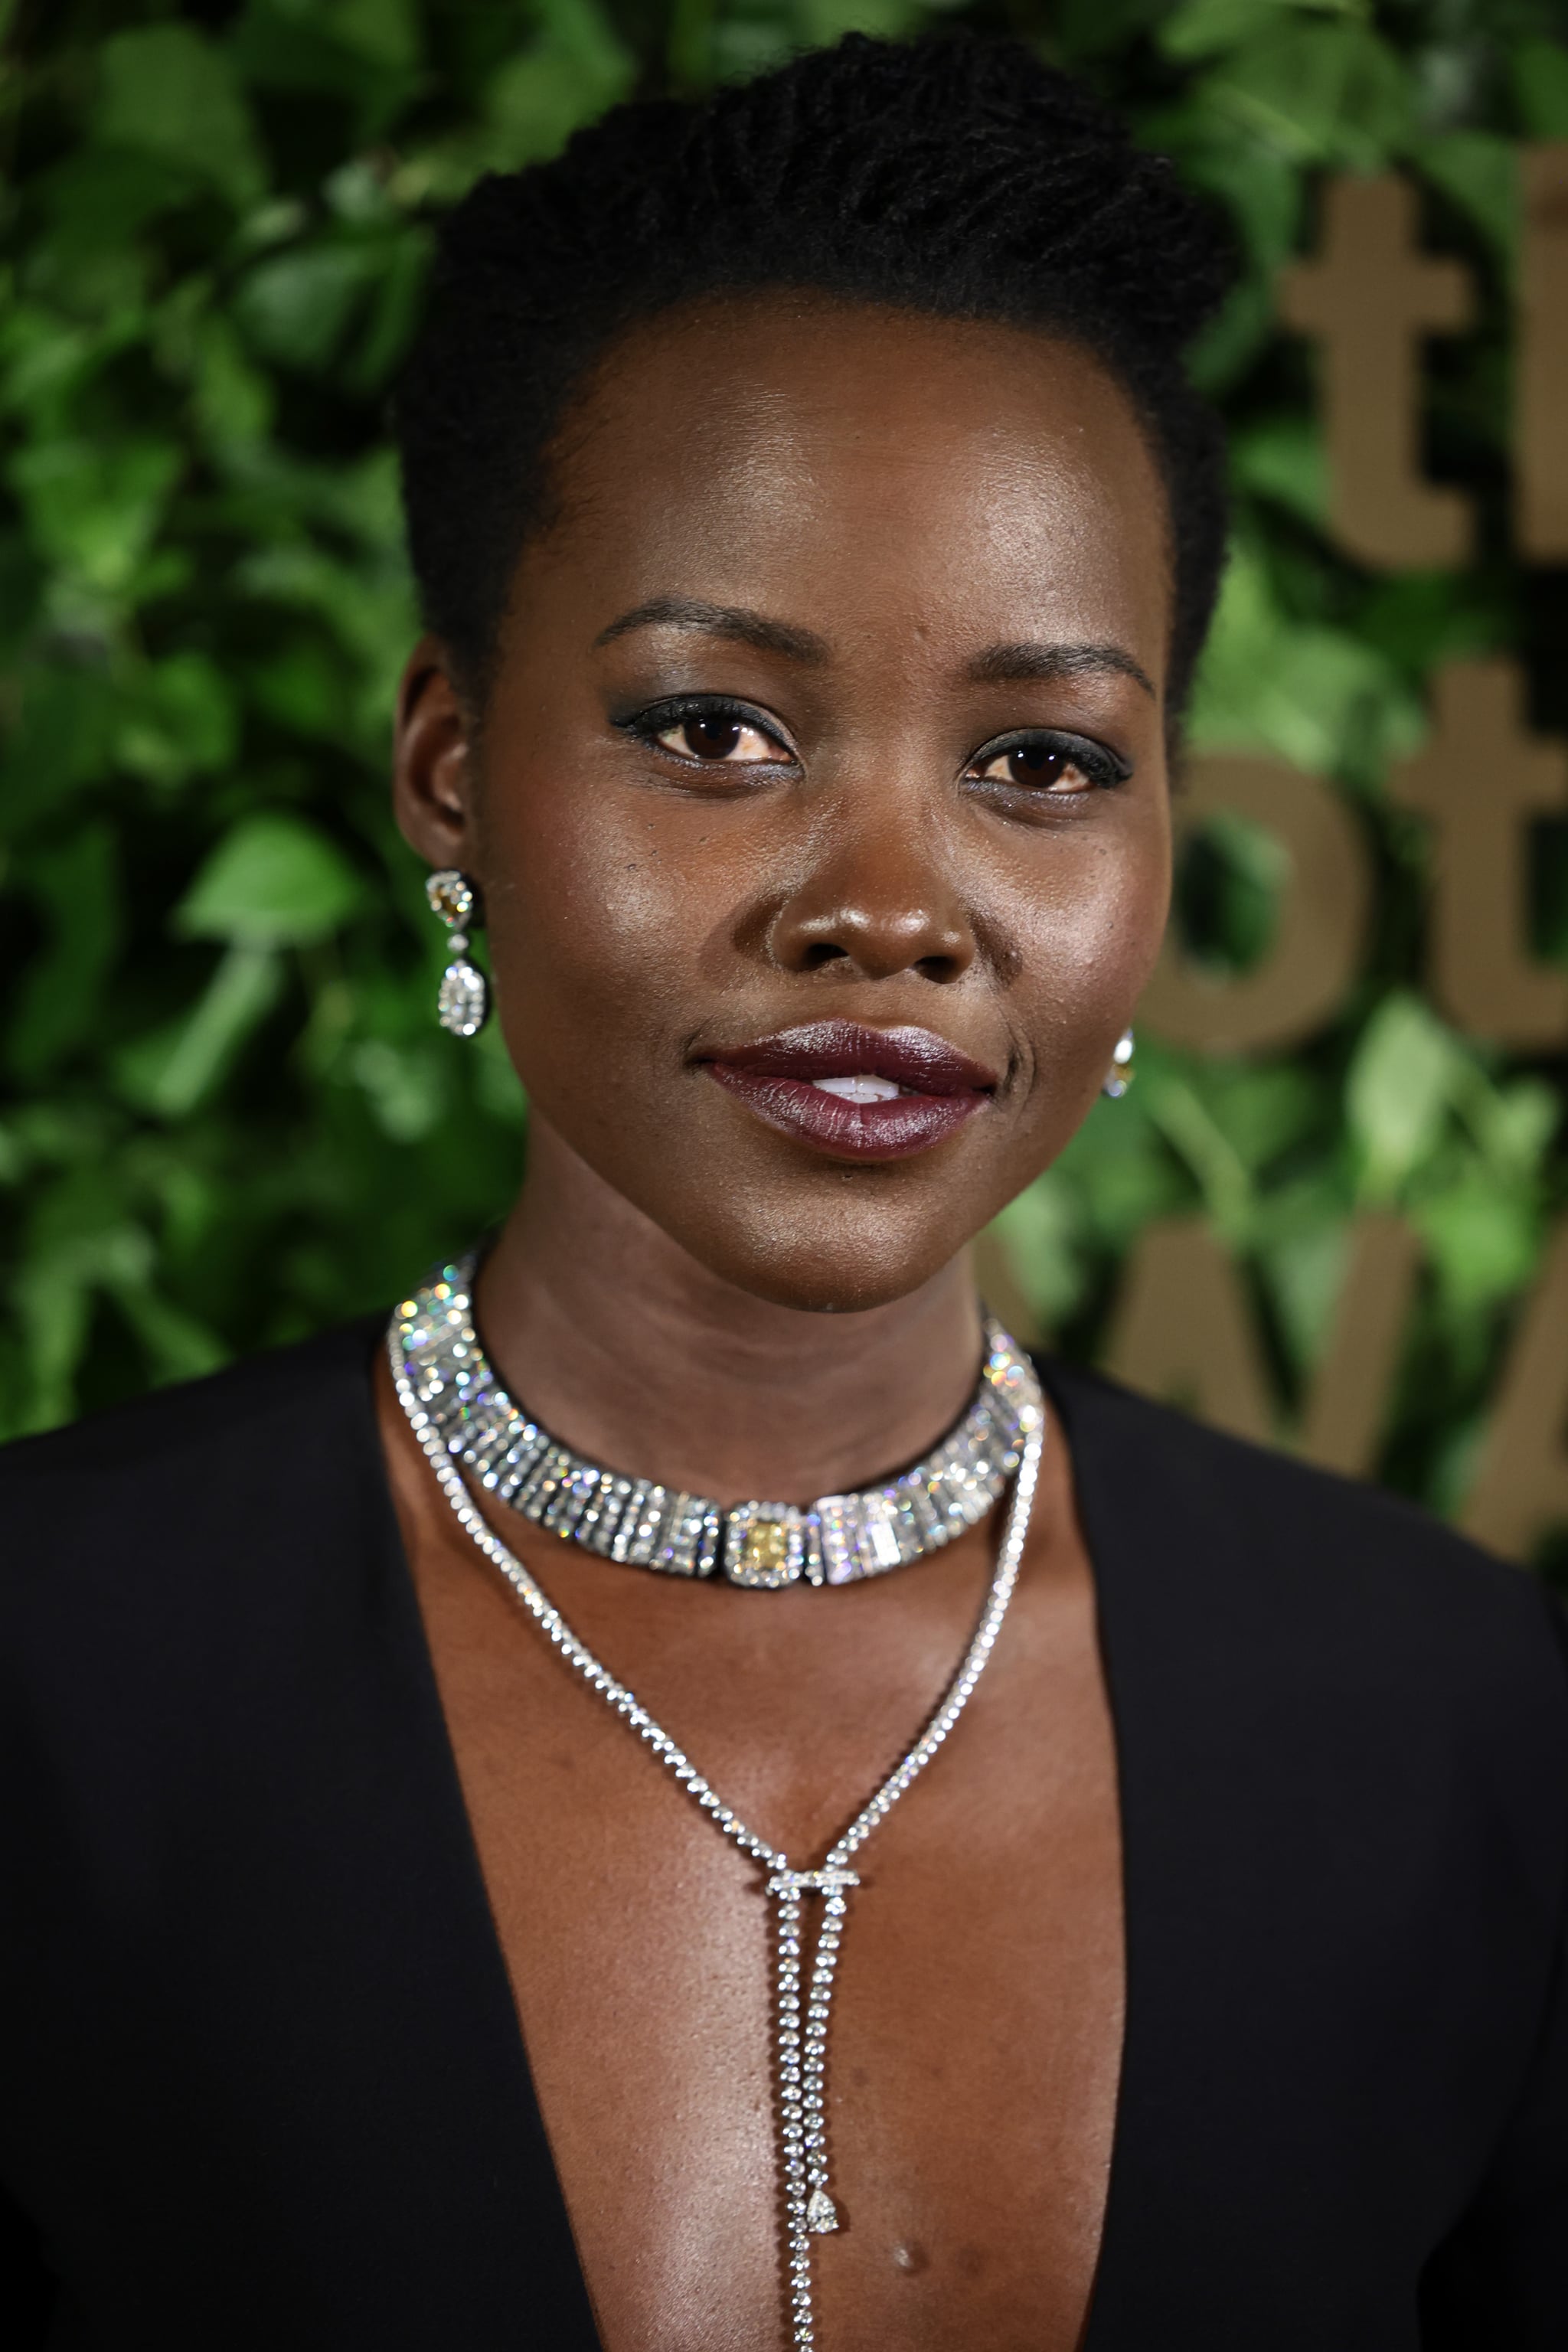 NEW YORK, NEW YORK - NOVEMBER 28: Lupita Nyong'o attends The 2022 Gotham Awards at Cipriani Wall Street on November 28, 2022 in New York City. (Photo by Dimitrios Kambouris/Getty Images for The Gotham Film & Media Institute)